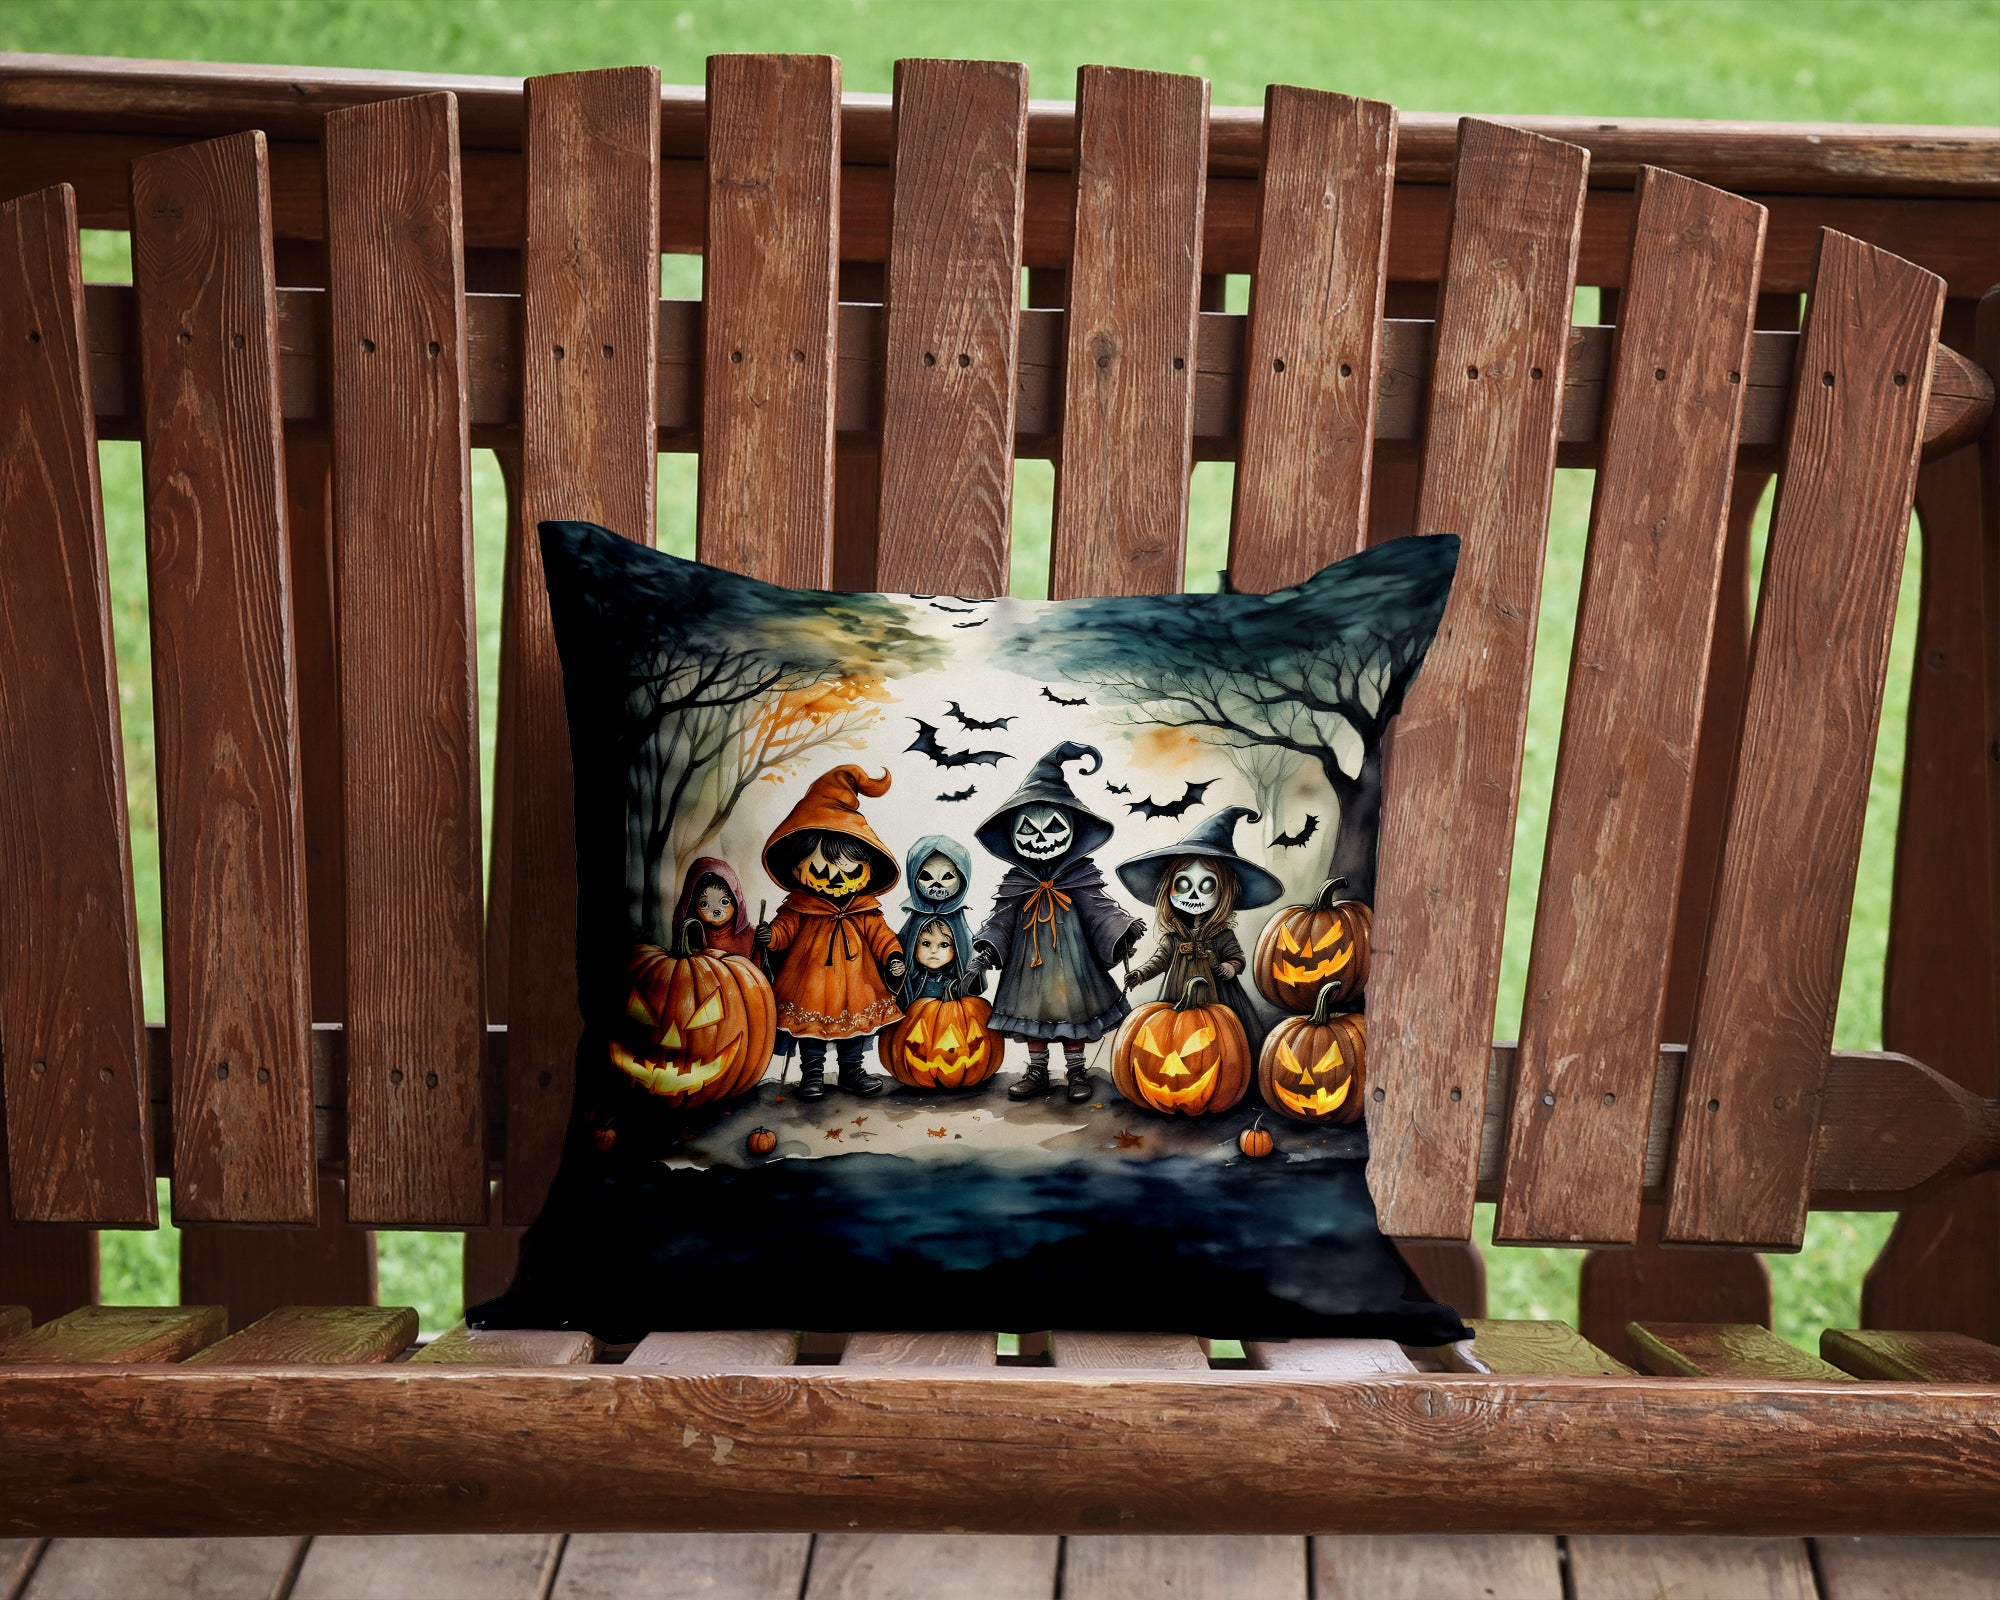 Buy this Trick or Treaters Spooky Halloween Fabric Decorative Pillow